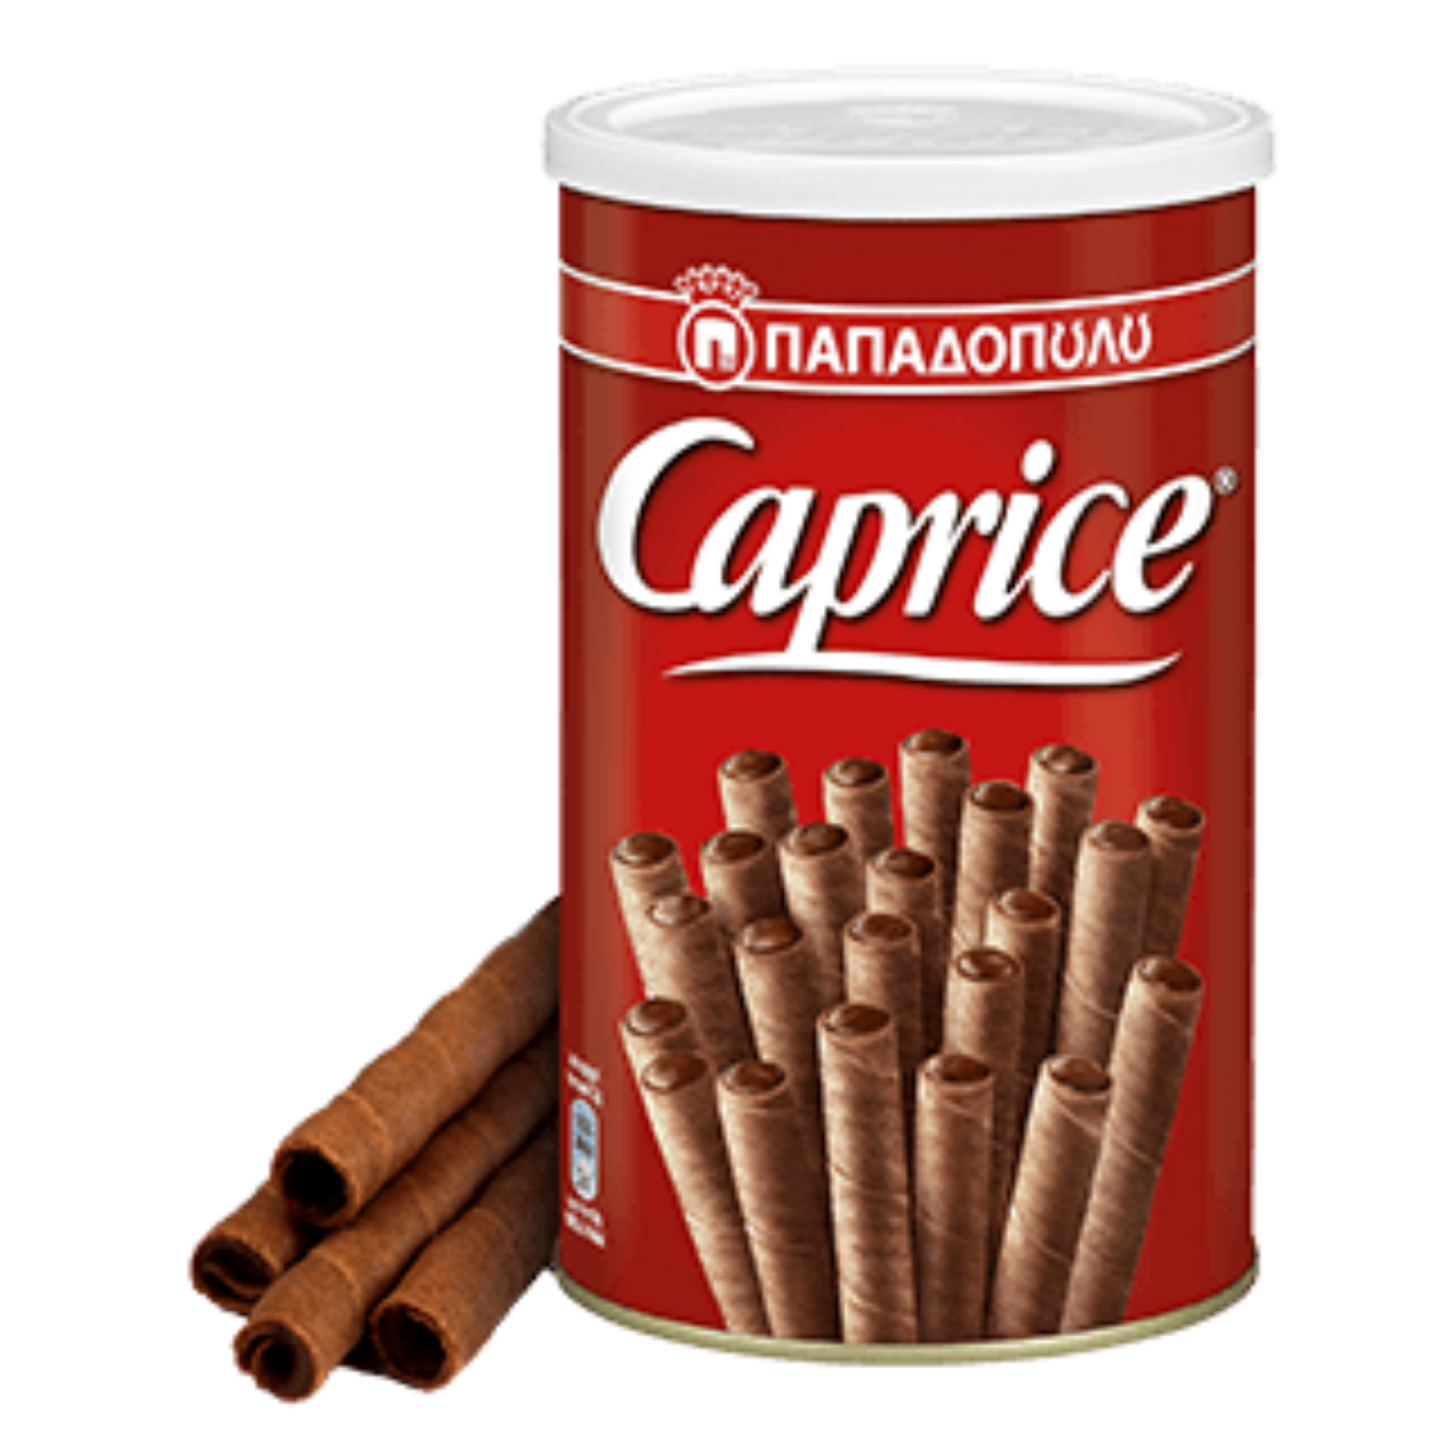 CAPRICE with hazelnut and cocoa cream 400 g from Greece